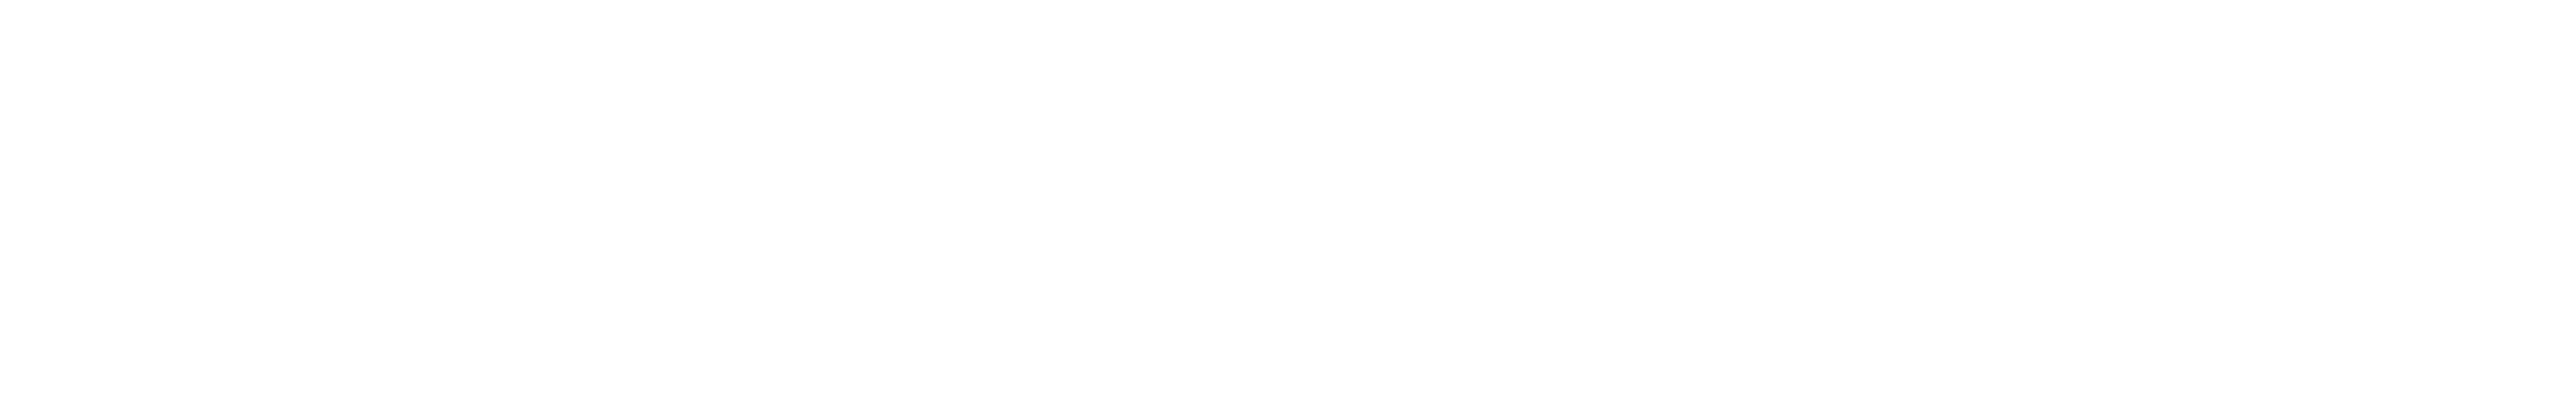 Habitat For Humanity of the Northern Flint Hills